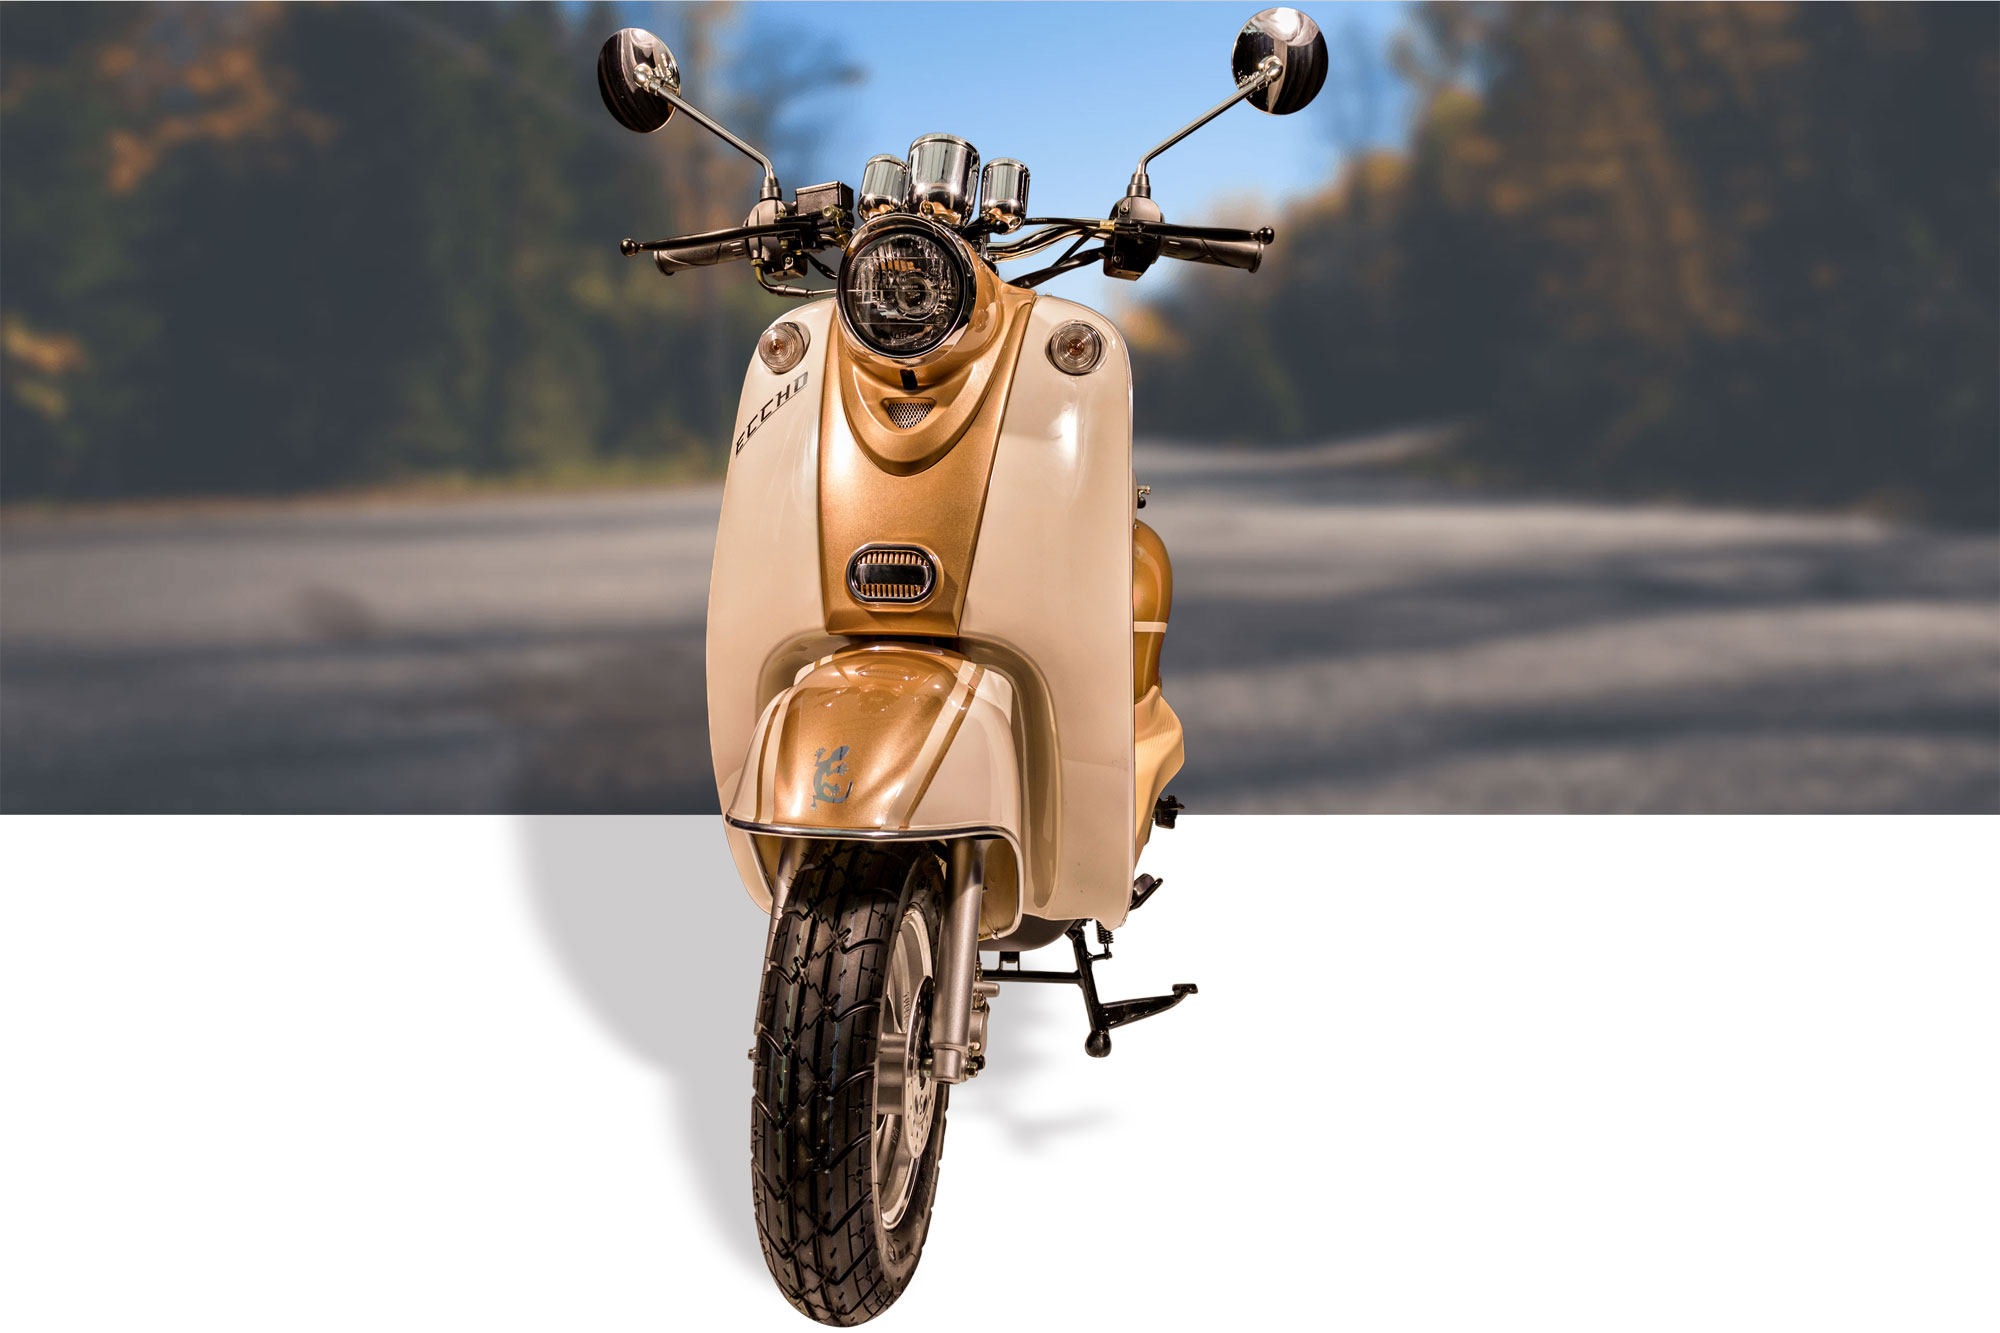 scooter-50-scooter-125-eccho-TY50QT-5D-GOLD